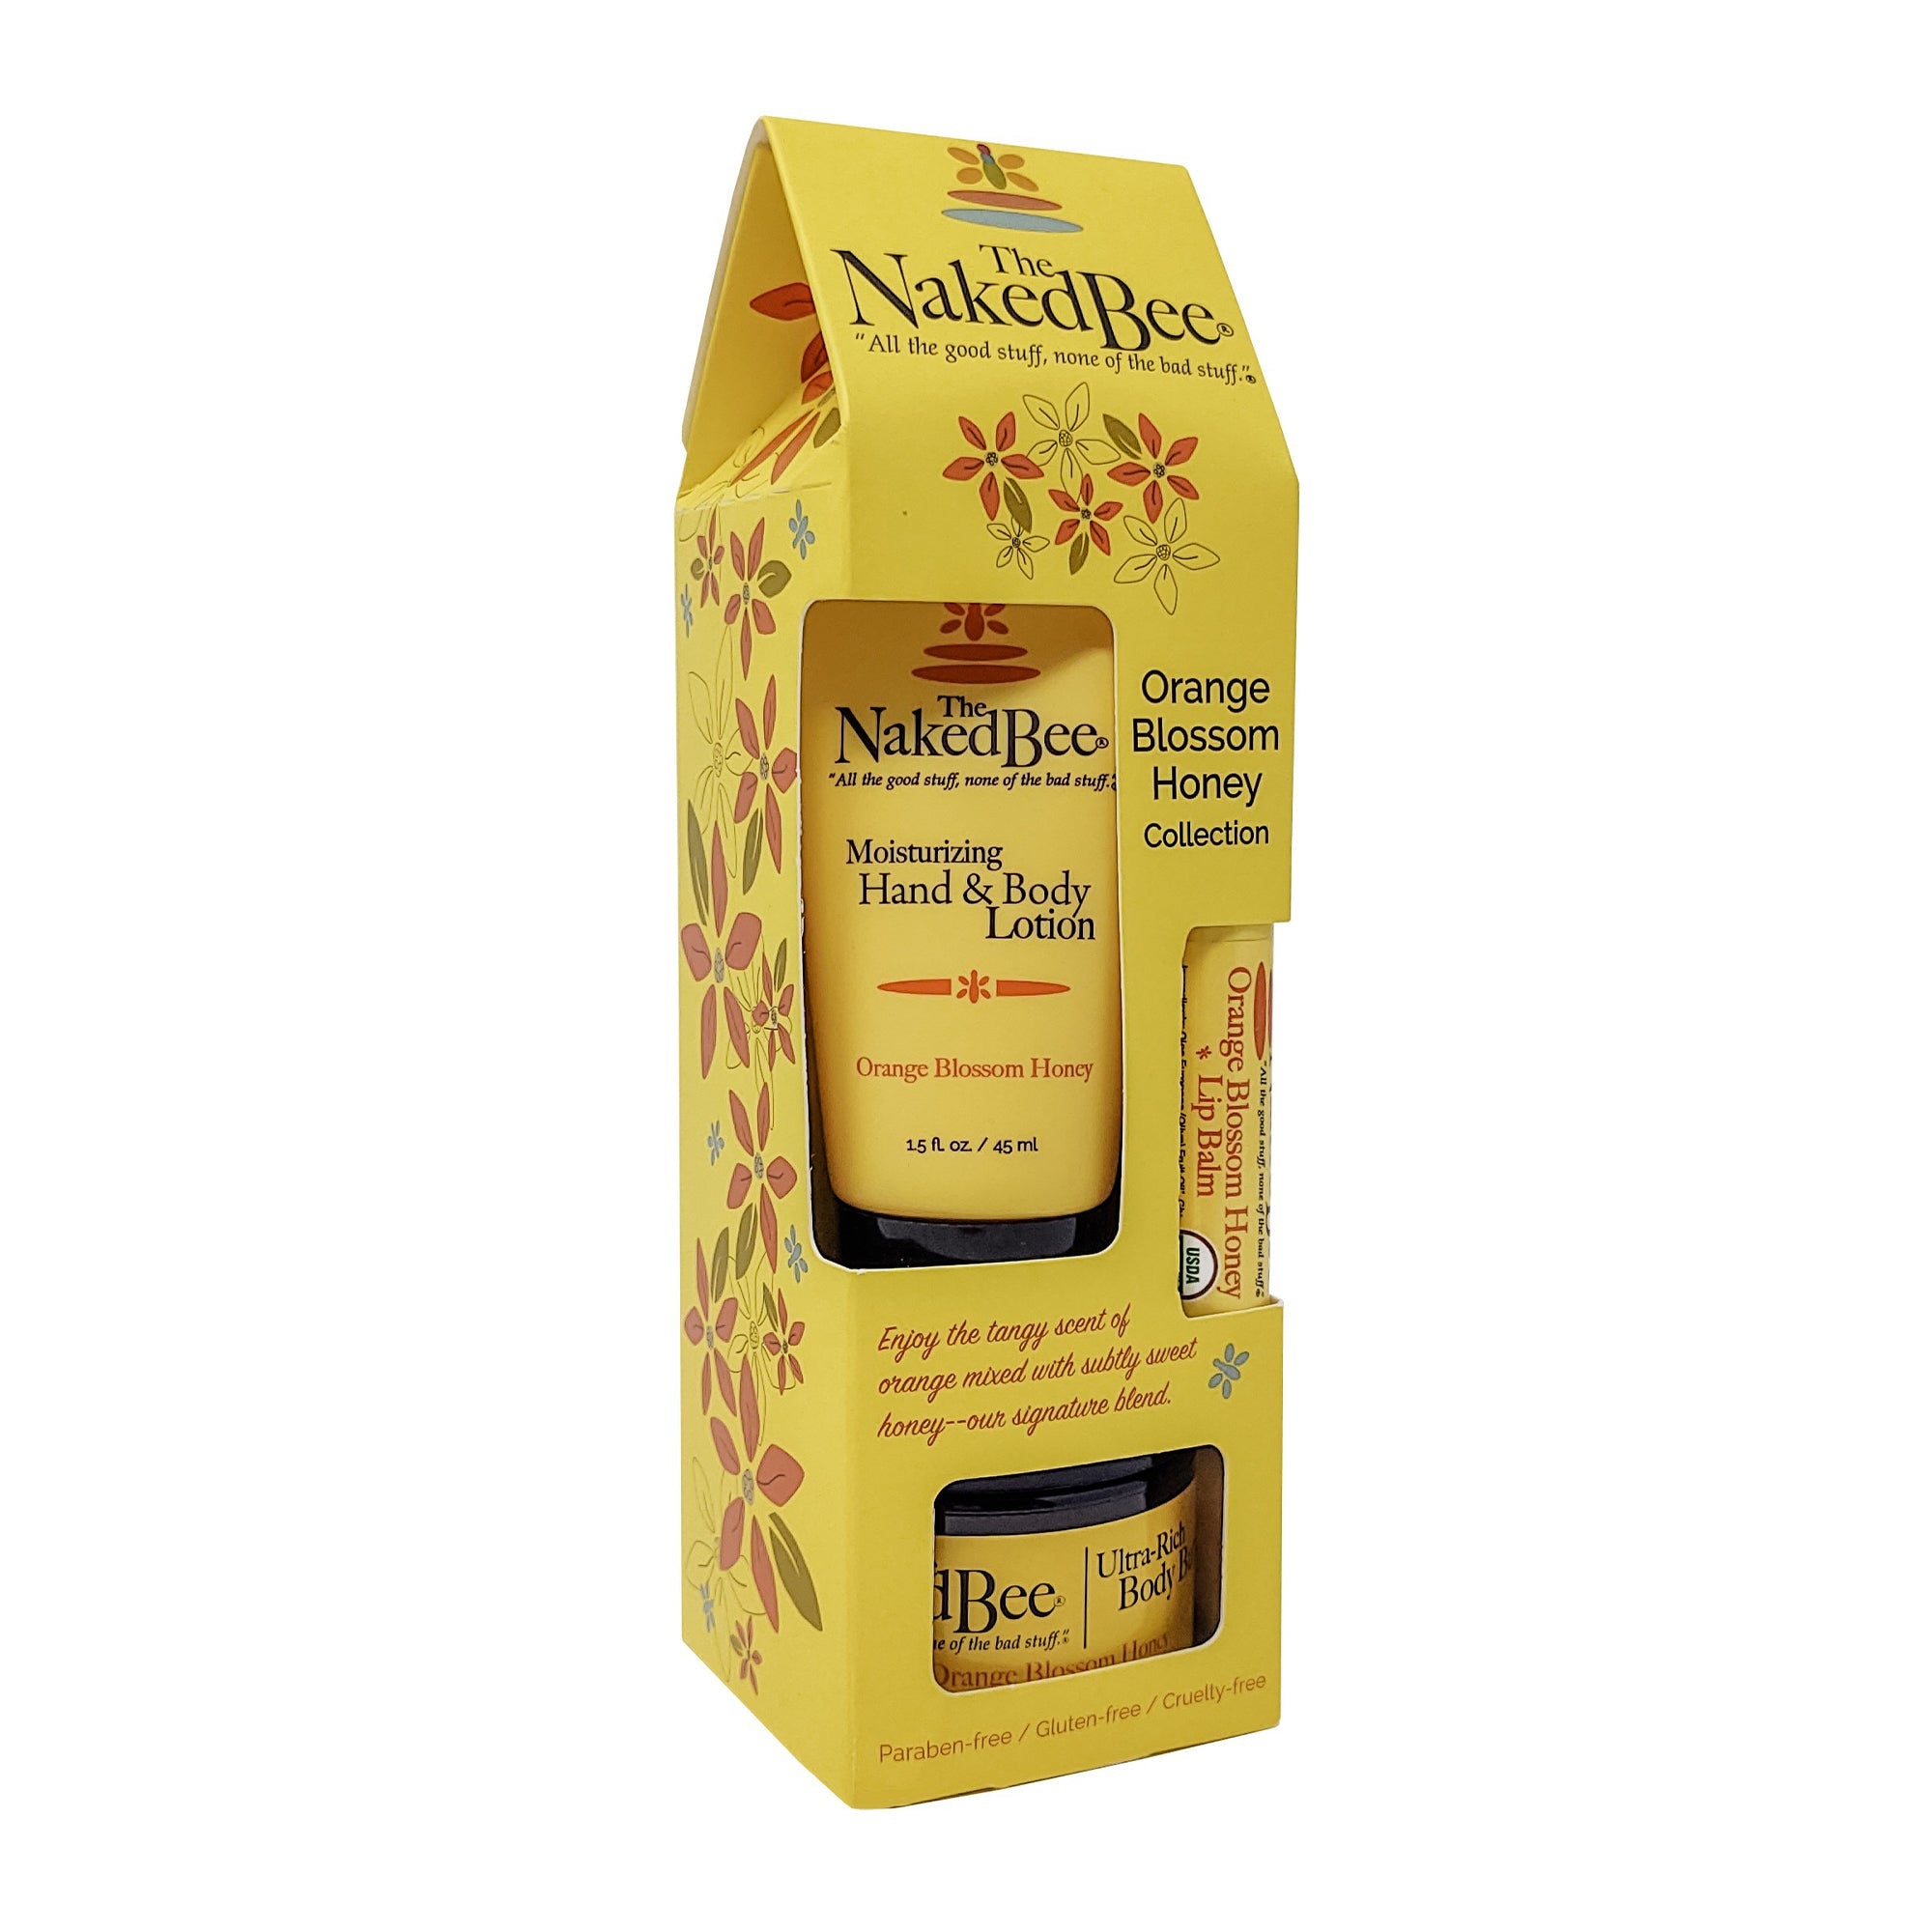 Naked Bee Gift Collection - Orange Blossom Honey